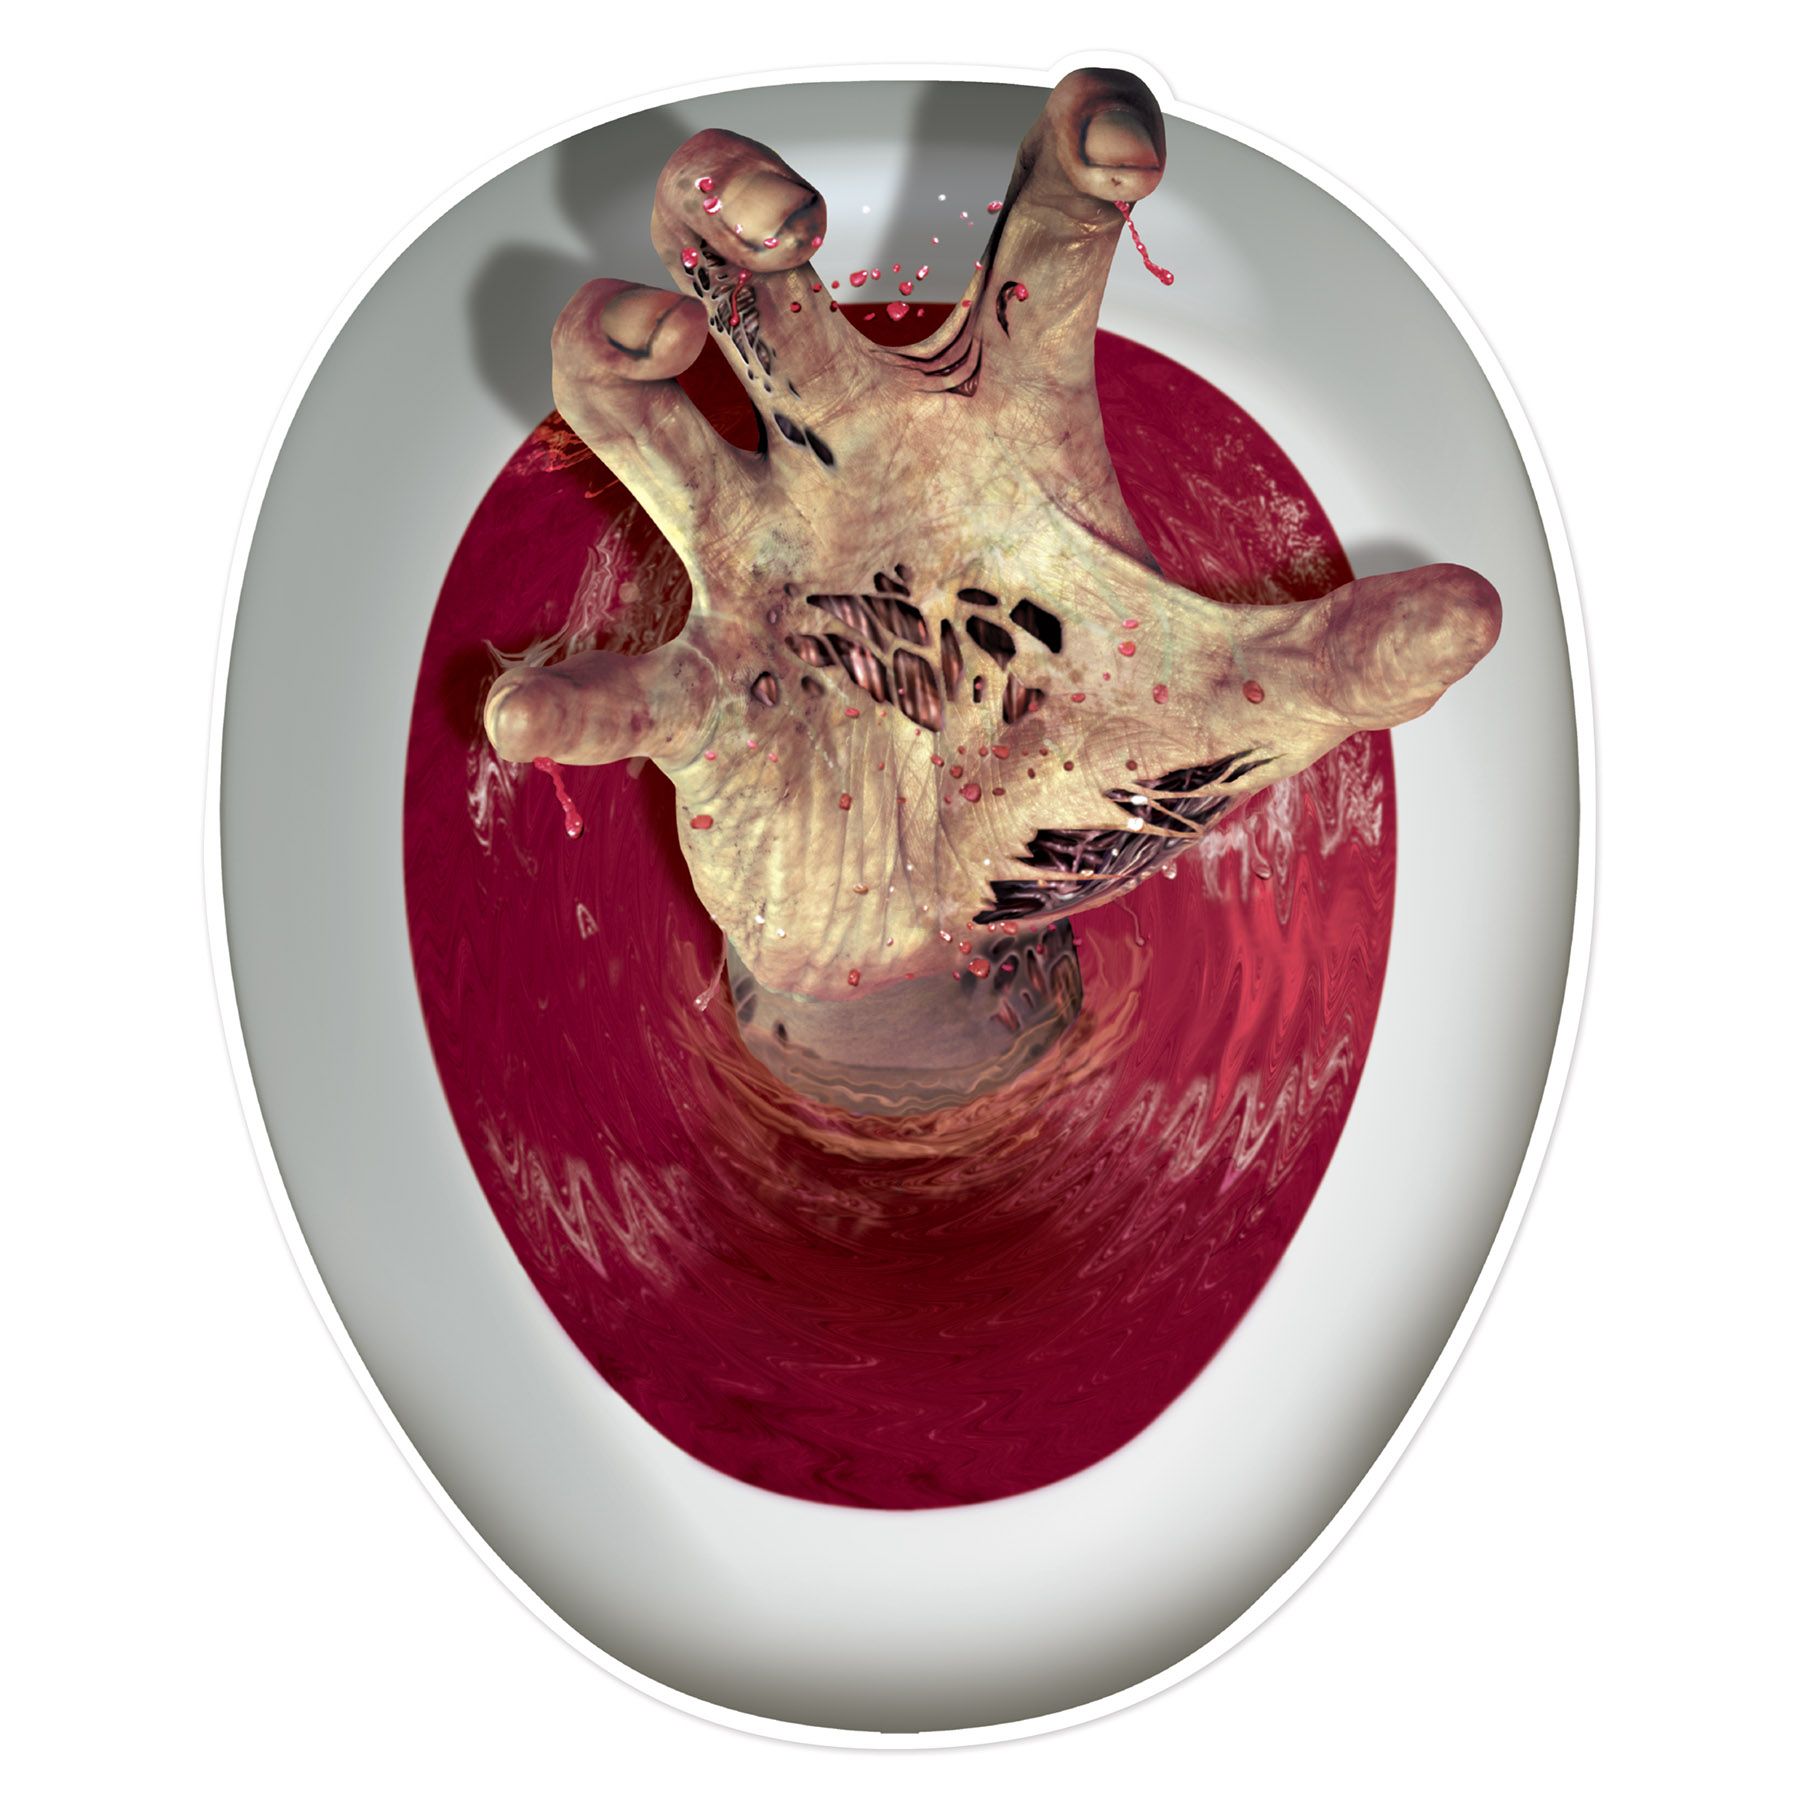 Zombie Hand Toilet Topper Peel N Place